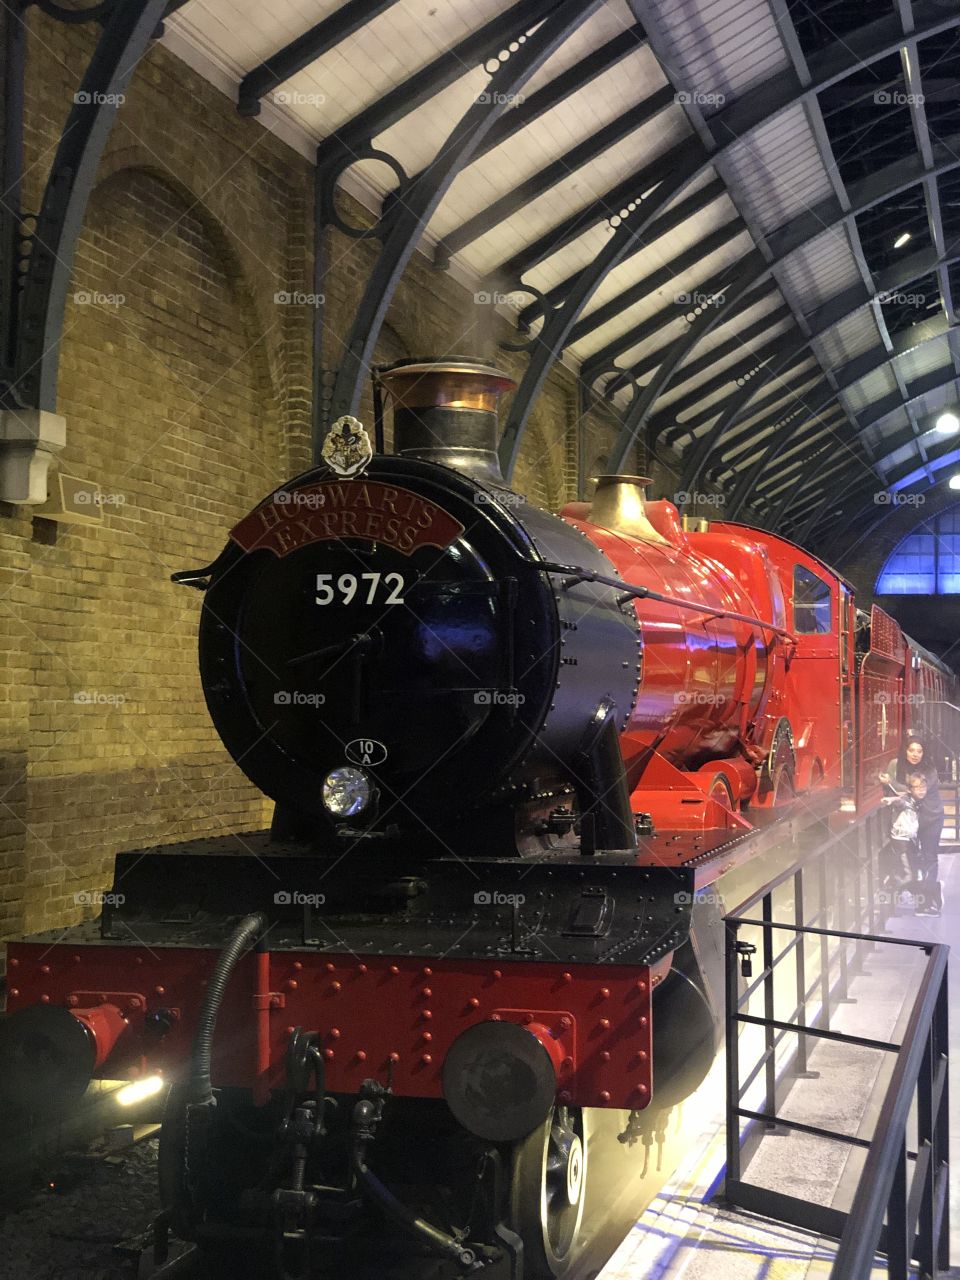 The Hogwarts express train used in the movies 